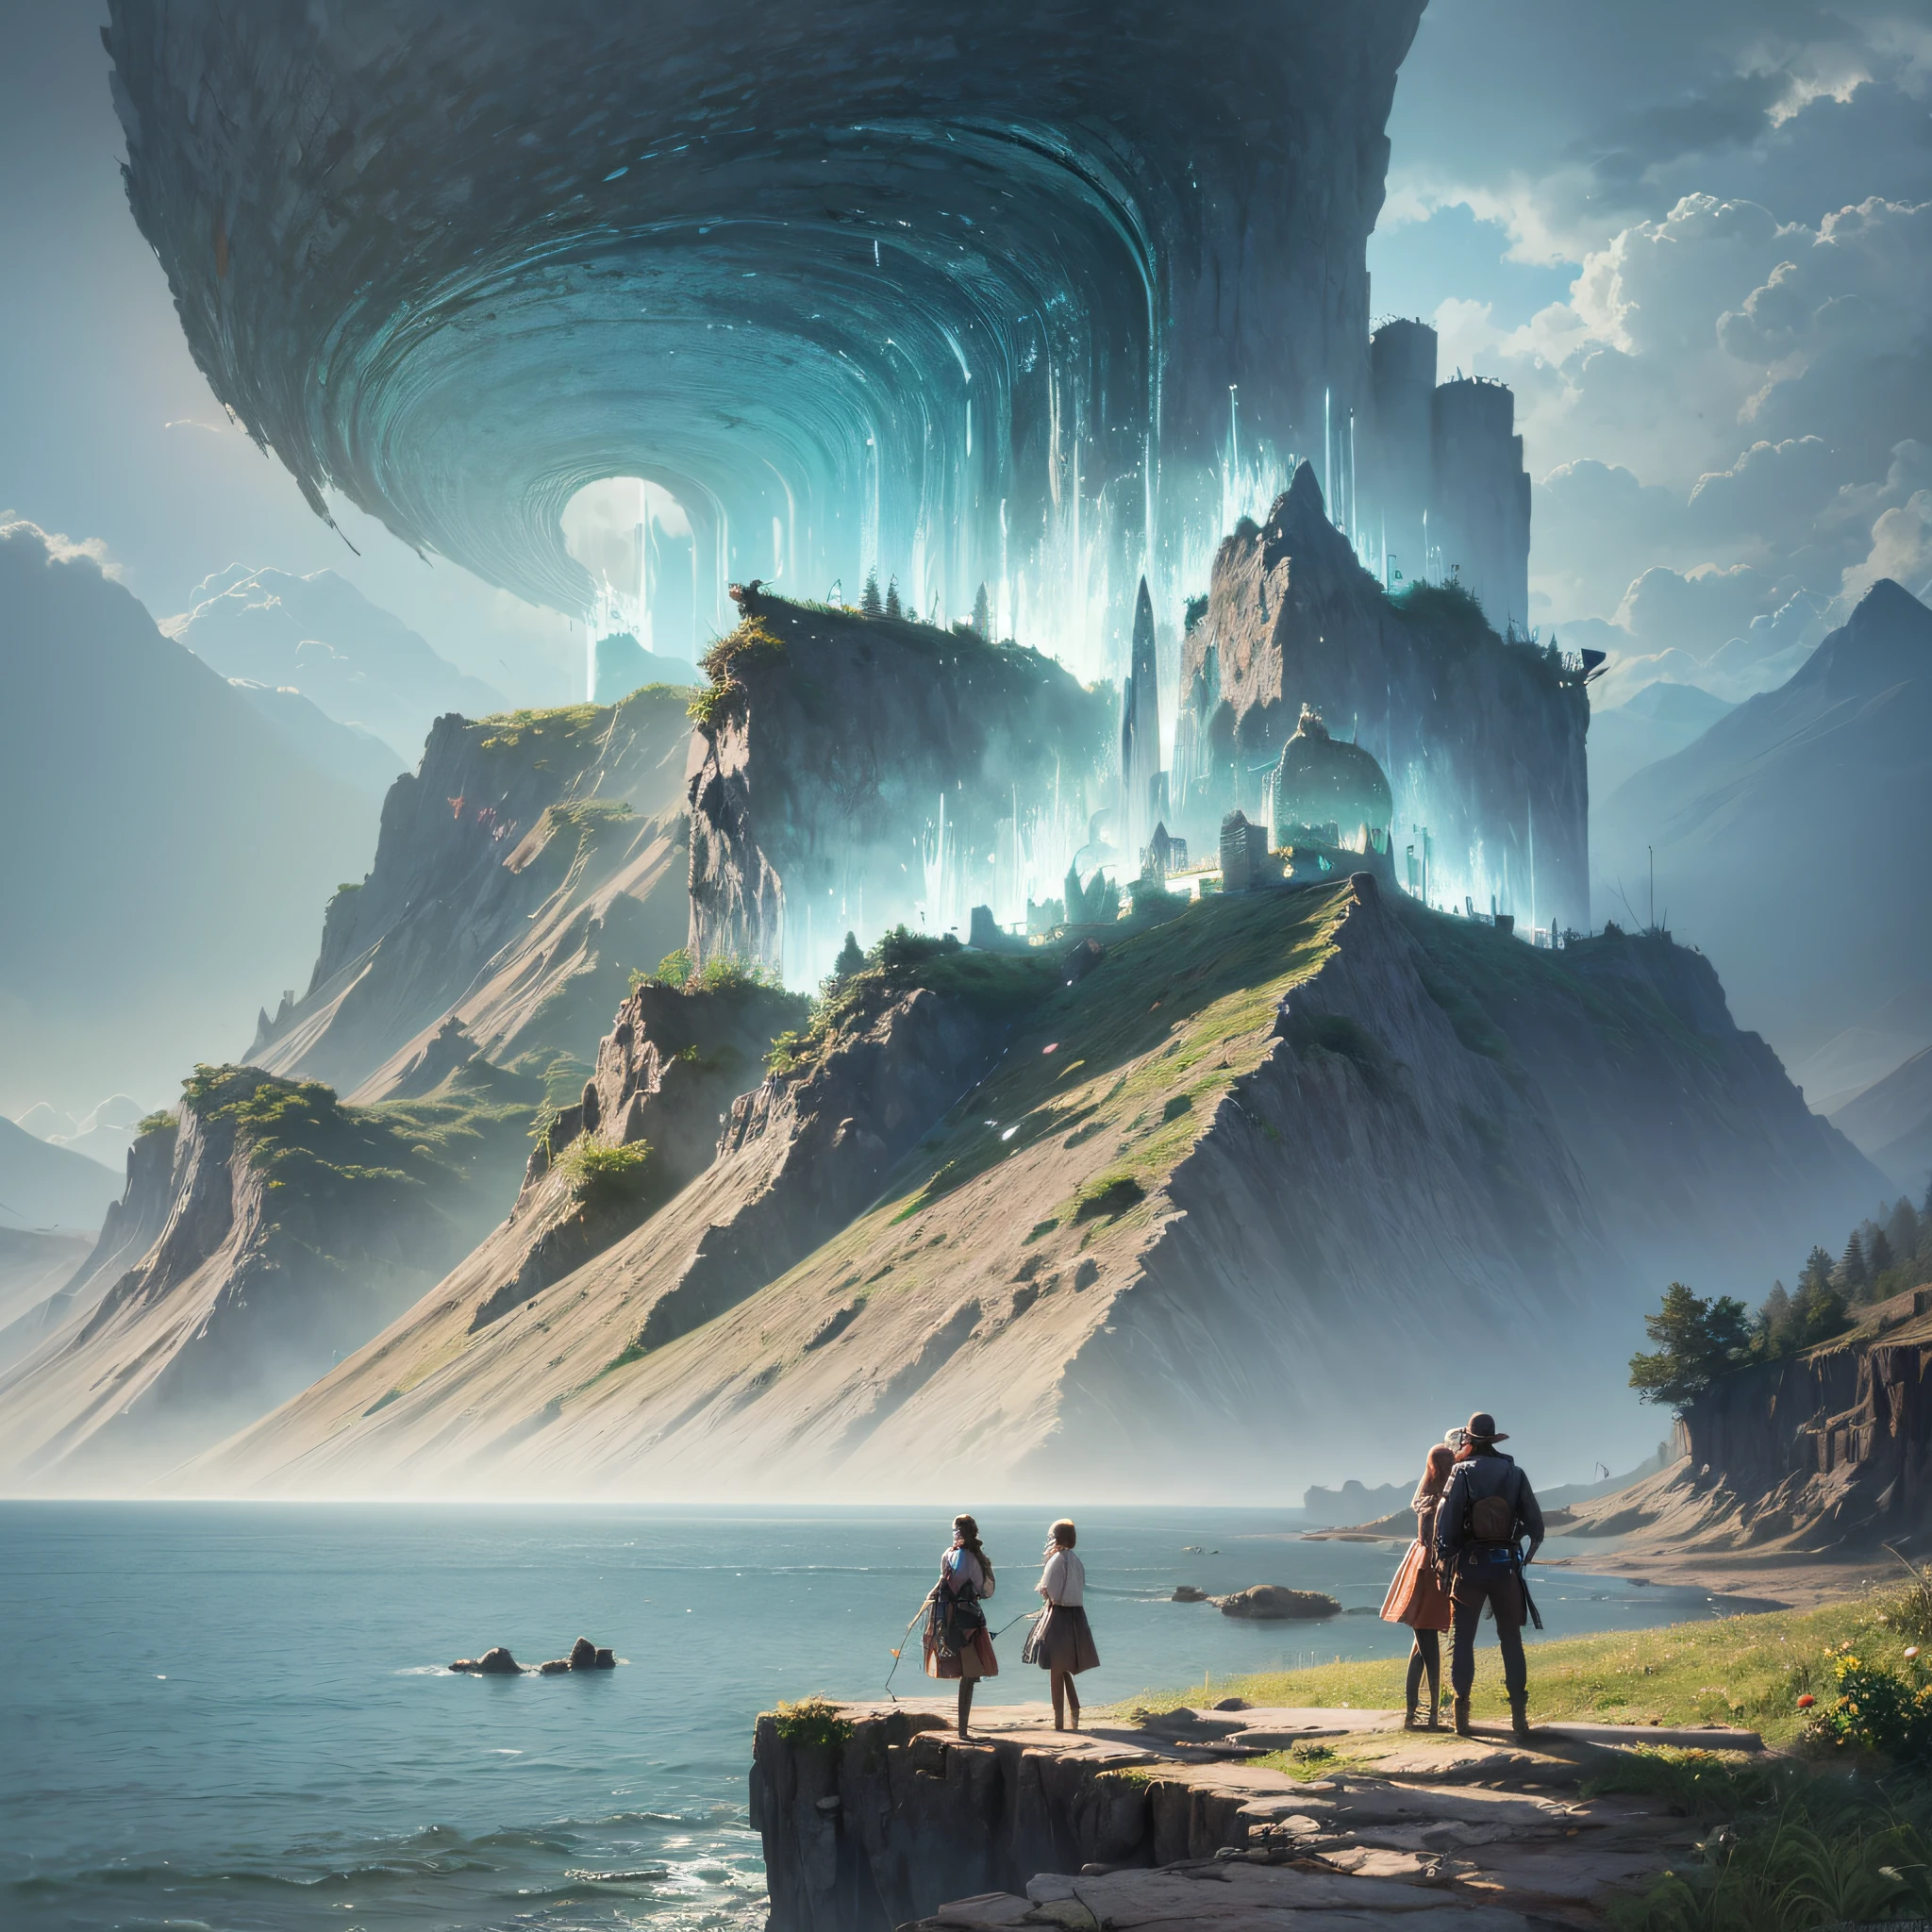 scene of a mountains, 3 people, bustling sea, great big storm, big tsunami, sunlight, glow, scenery concept art, overgrowth. by Renoir , relaxing concept art, traditional classic concept art, a beautiful artwork illustration. high detail, background art, detailed concept art, environment design illustration, concept art highly detailed